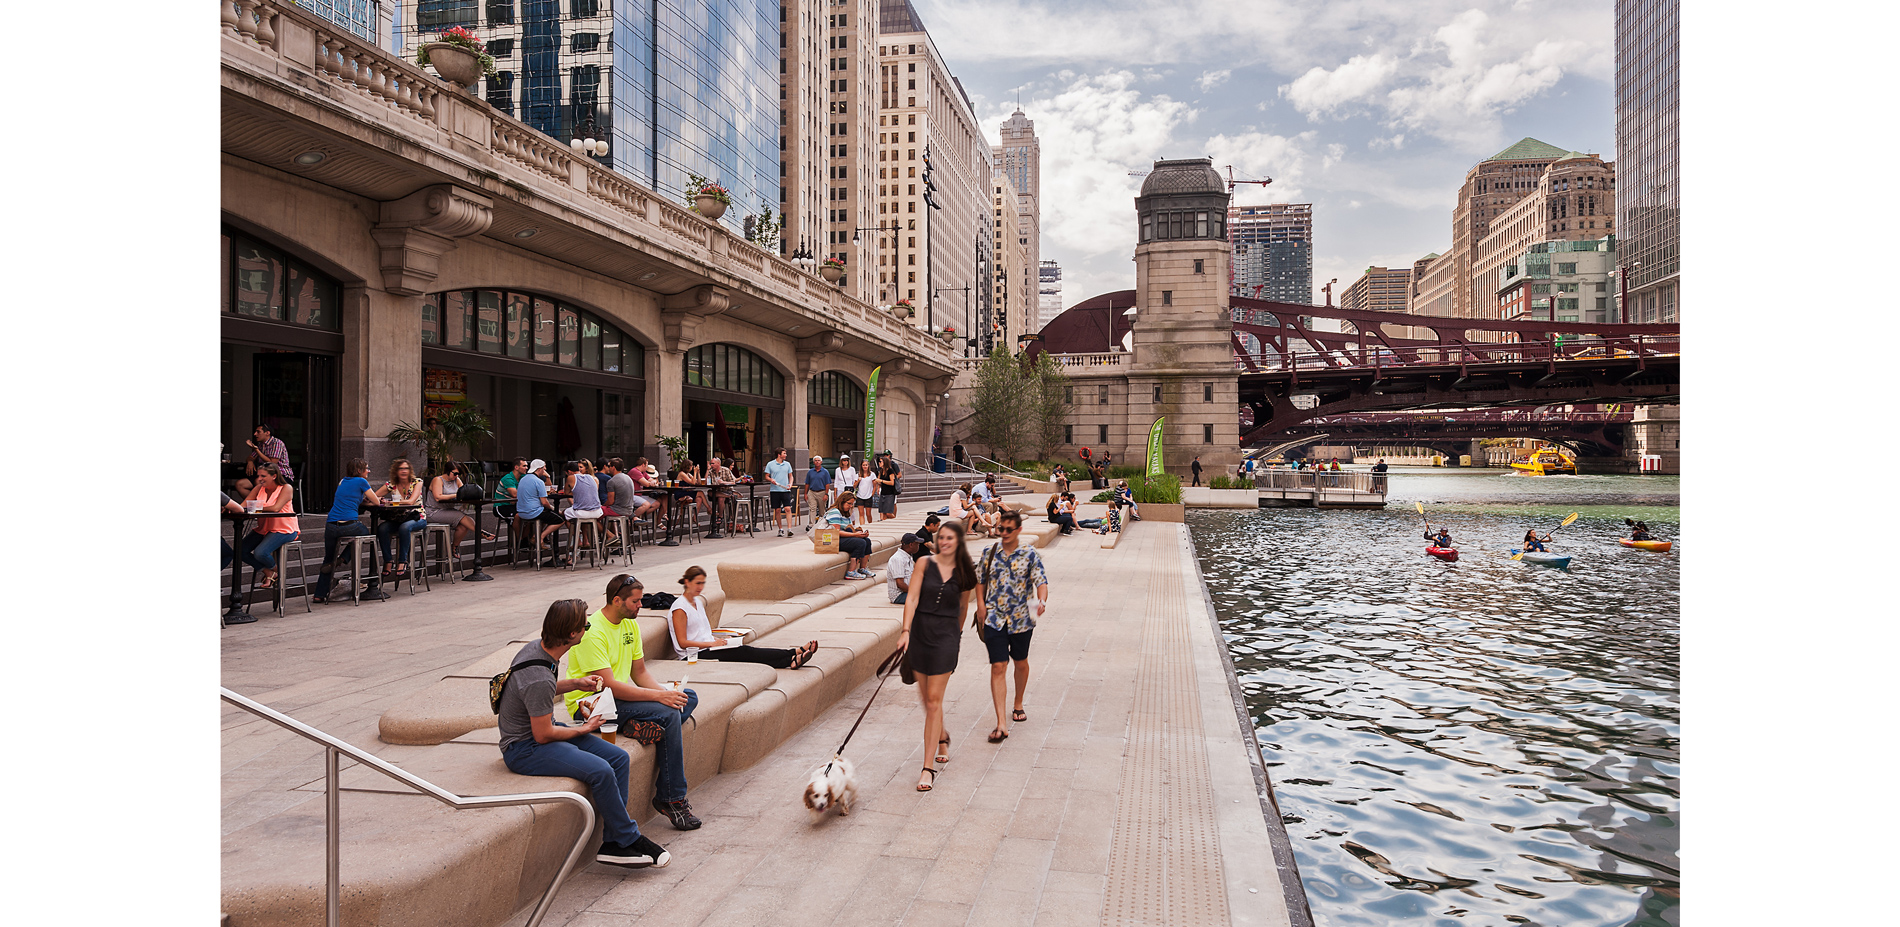 Custom precast seating elements capitalize on the shallow grade changes and create sunny places for sitting near the river’s edge. Flood-tolerant and …